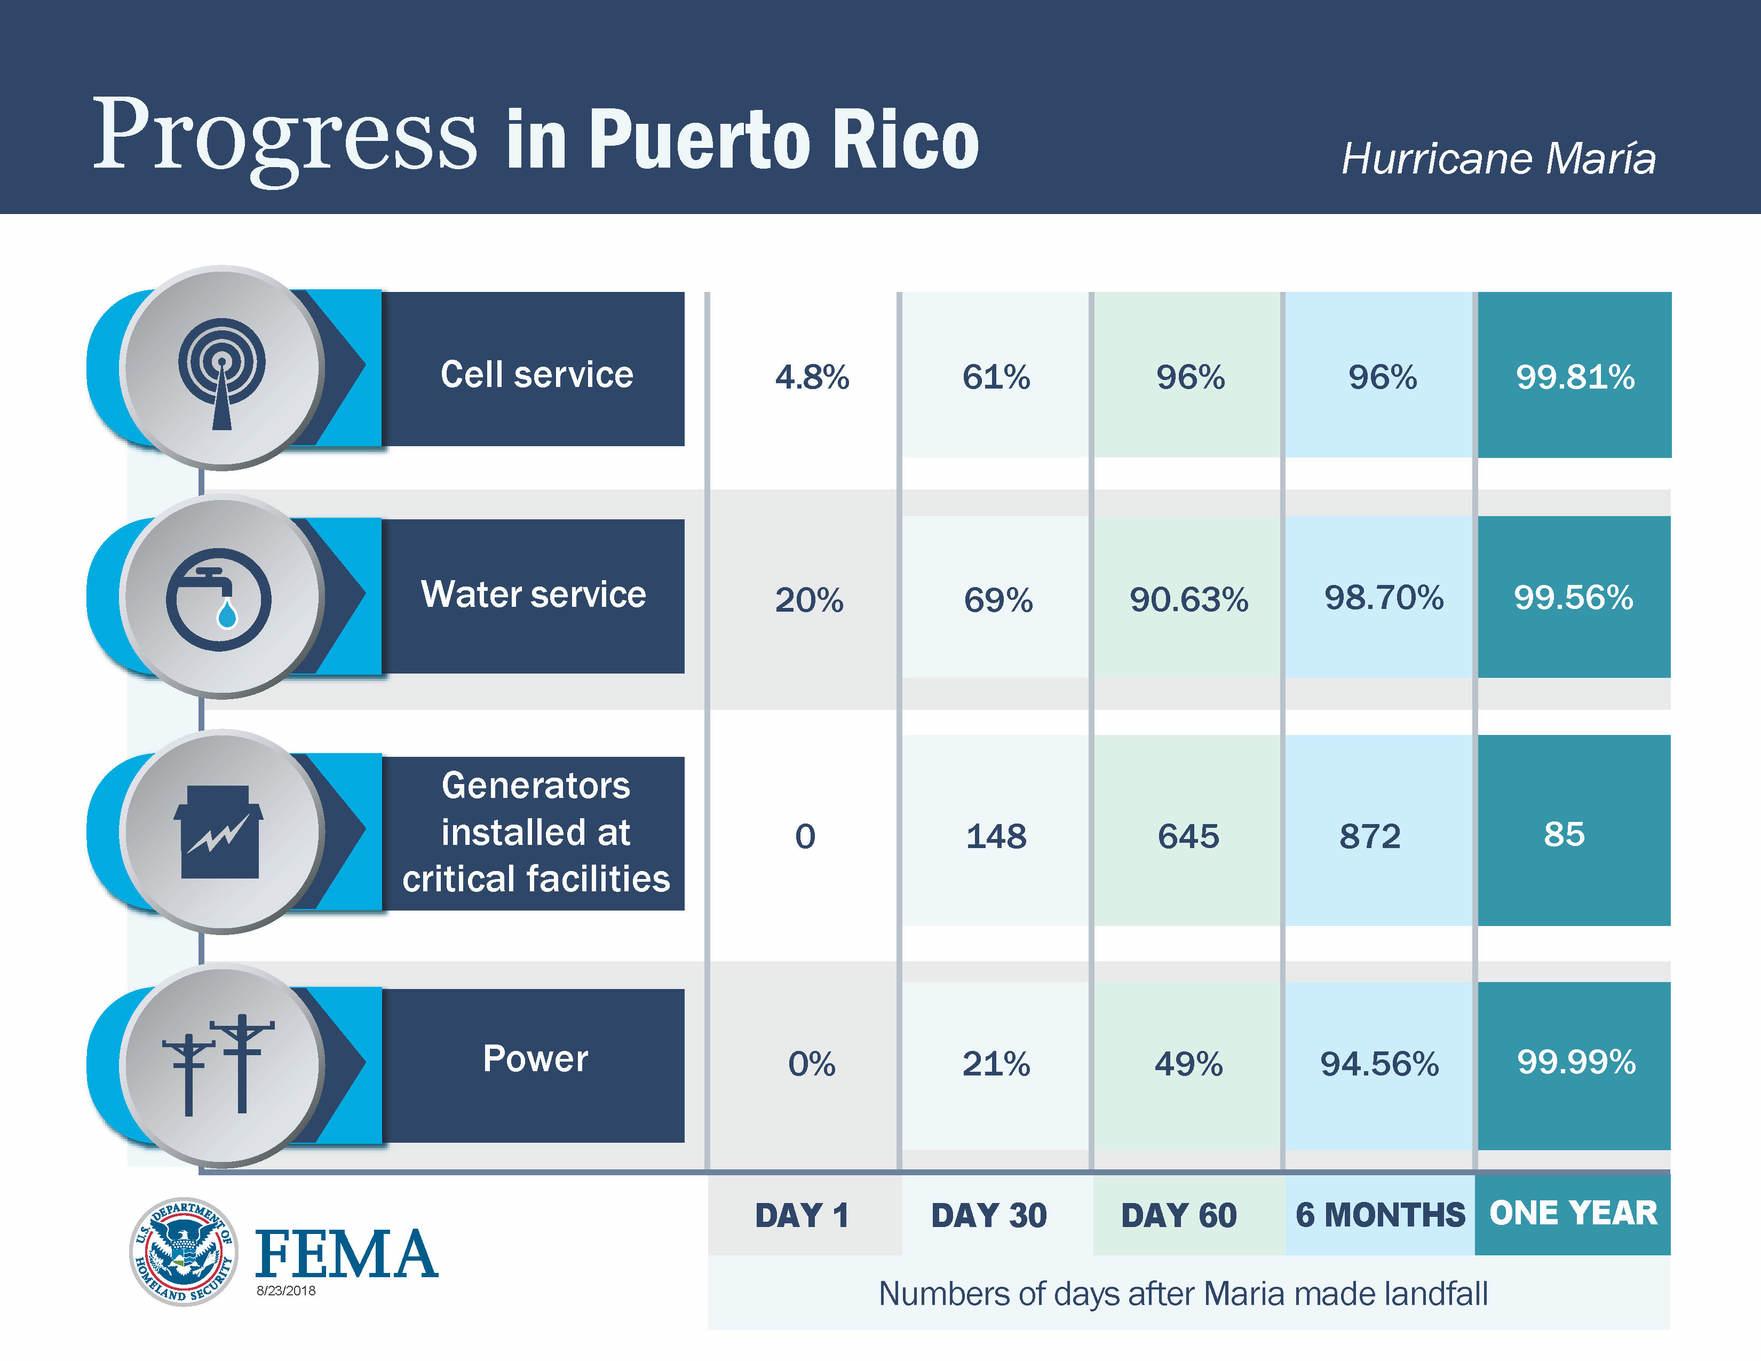 Progress in Puerto Rico, Hurricane María. Numbers of days after María made landfall. DAY 1 - Cell service 4.8%, Water service 20%, Generators installed at critical facilities 0, Power 0%. DAY 30 - Cell service 61%, Water service 69%, Generators installed at critical facilities 148, Power 21%. DAY 60 - Cell service 96%, Water service 90.63%, Generators installed at critical facilities 645, Power 49%. 6 MONTHS - Cell service 96%, Water service 98.7%, Generators installed at critical facilities 872, Power 94.56%. ONE YEAR - Cell service 99.81%, Water service 99.56%, Generators installed at critical facilities 129, Power 99.99%.